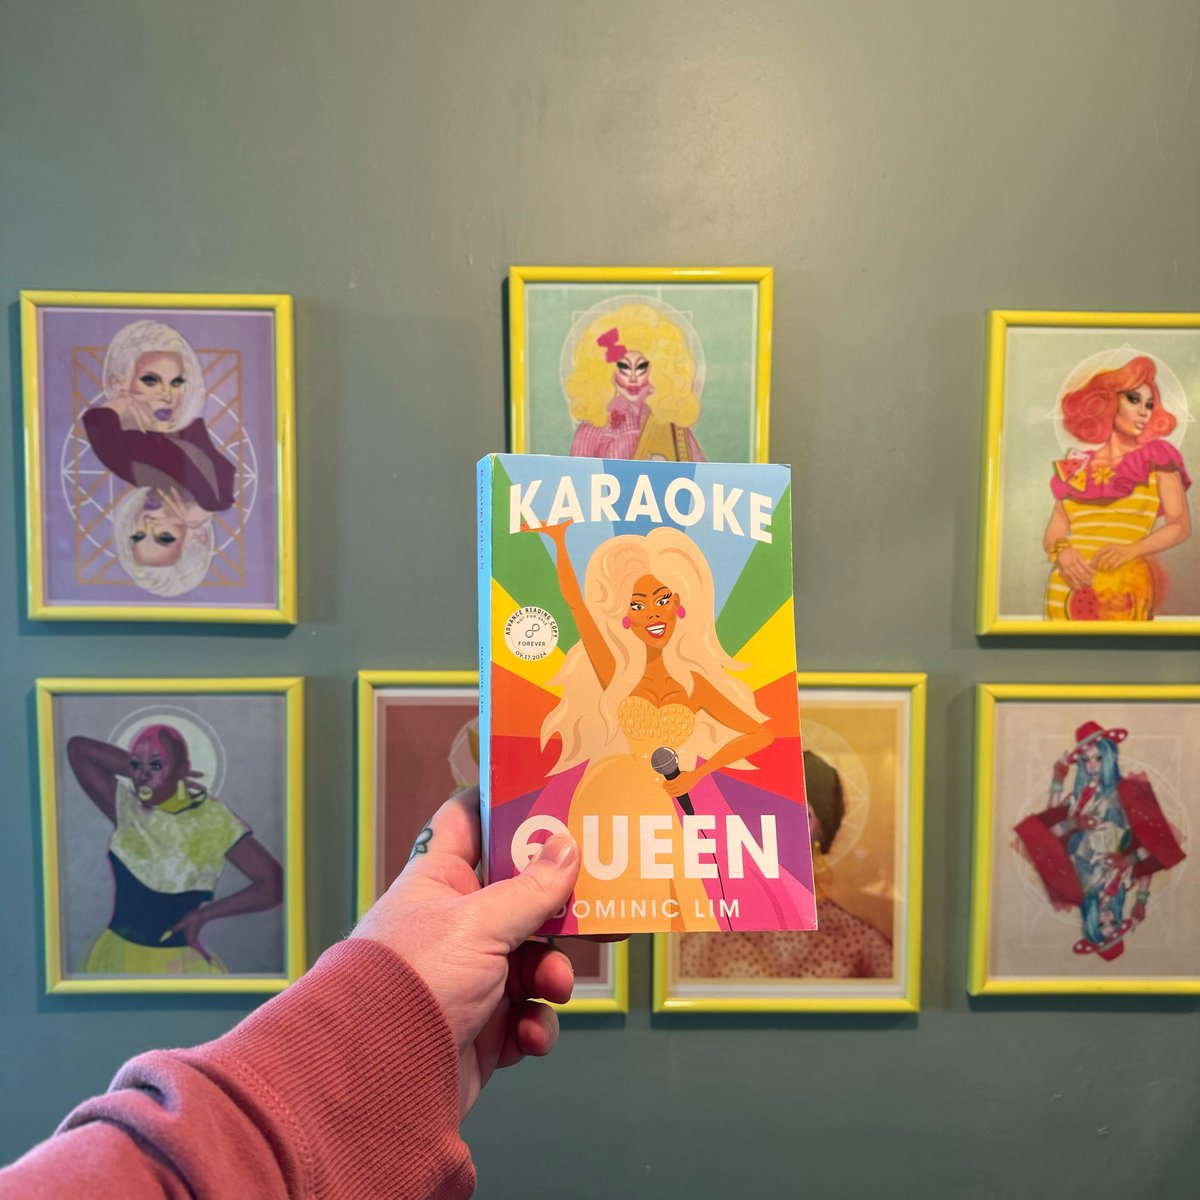 Another exciting bit of recent book mail at Joe’s house- Karaoke Queen by @jdominiclim ! Combining his love of drag and Karaoke, Lim shares the story of Rex Araneta AKA Regina Moon Dee in this joyfully queer rom-com✨